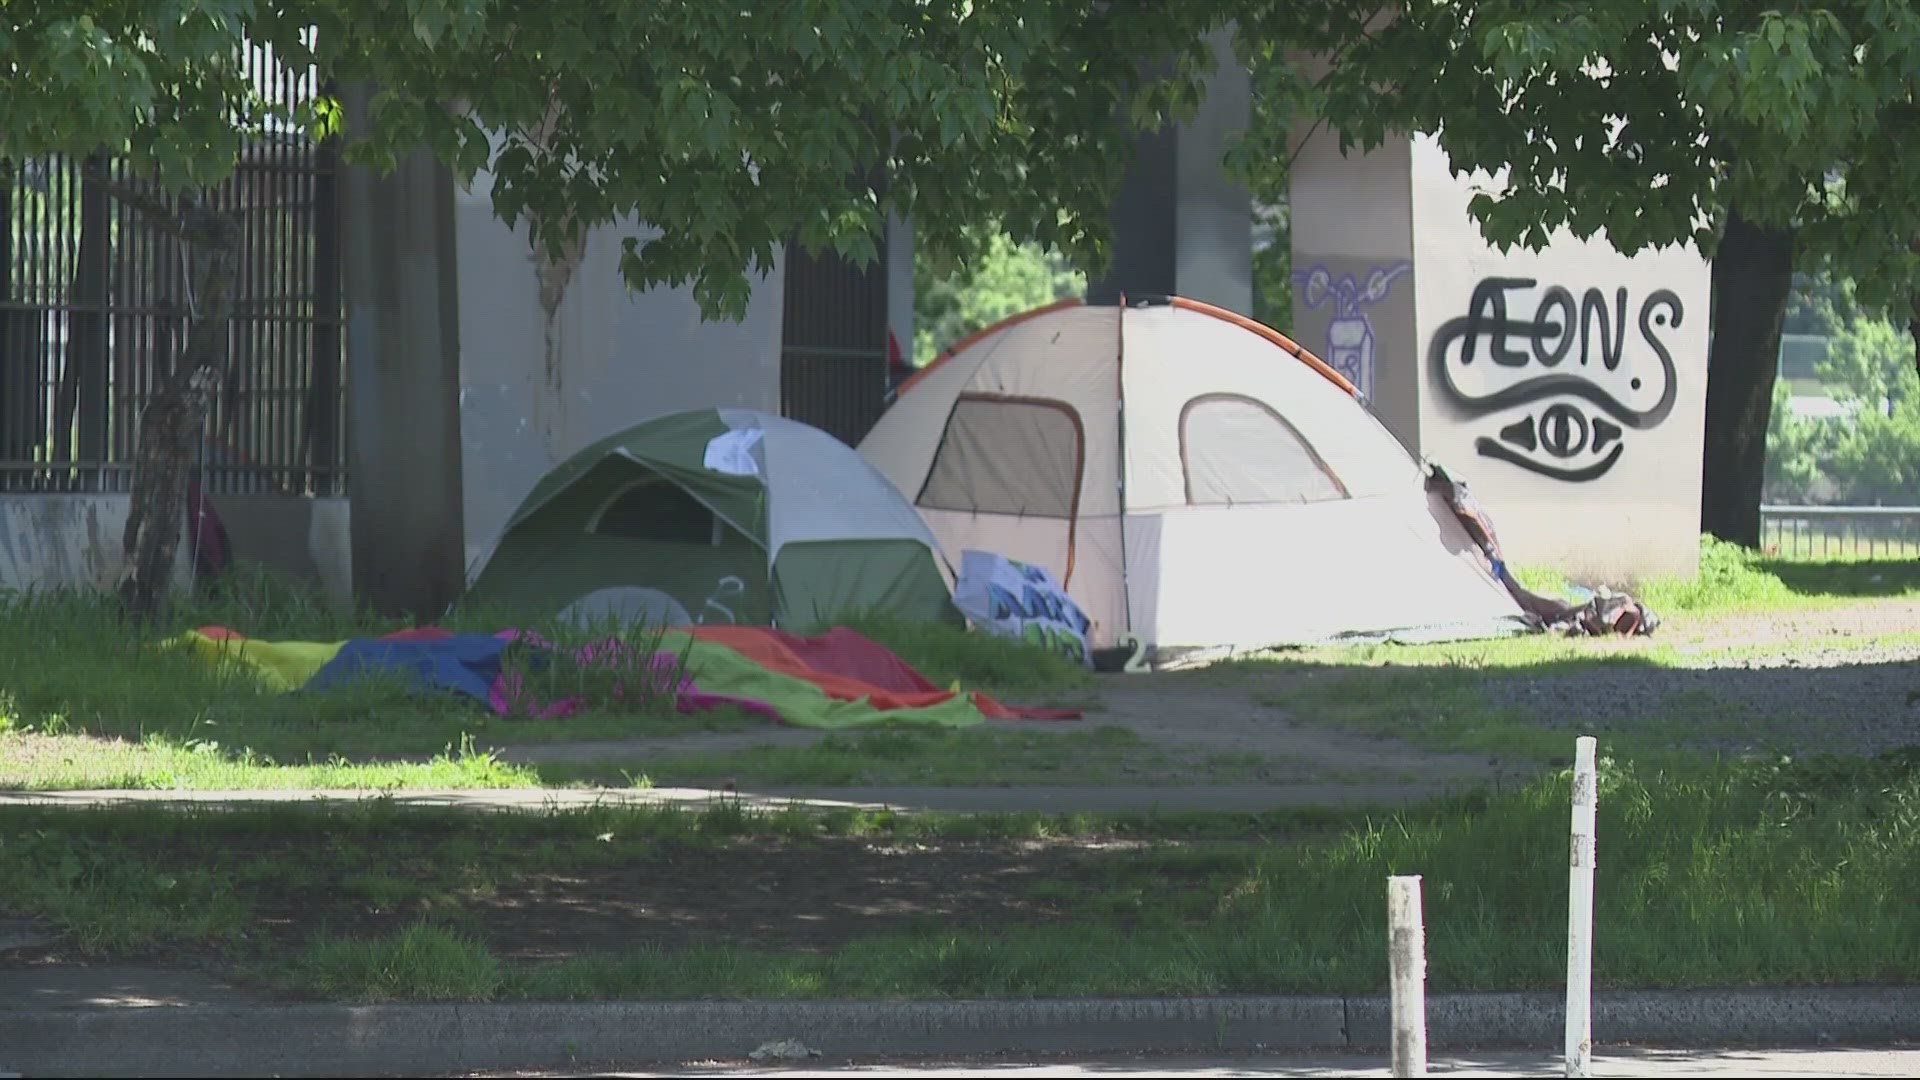 Wheeler's proposal would ban camping on city property — like parks and sidewalks — from 8 a.m. to 8 p.m., the Willamette Week reported.